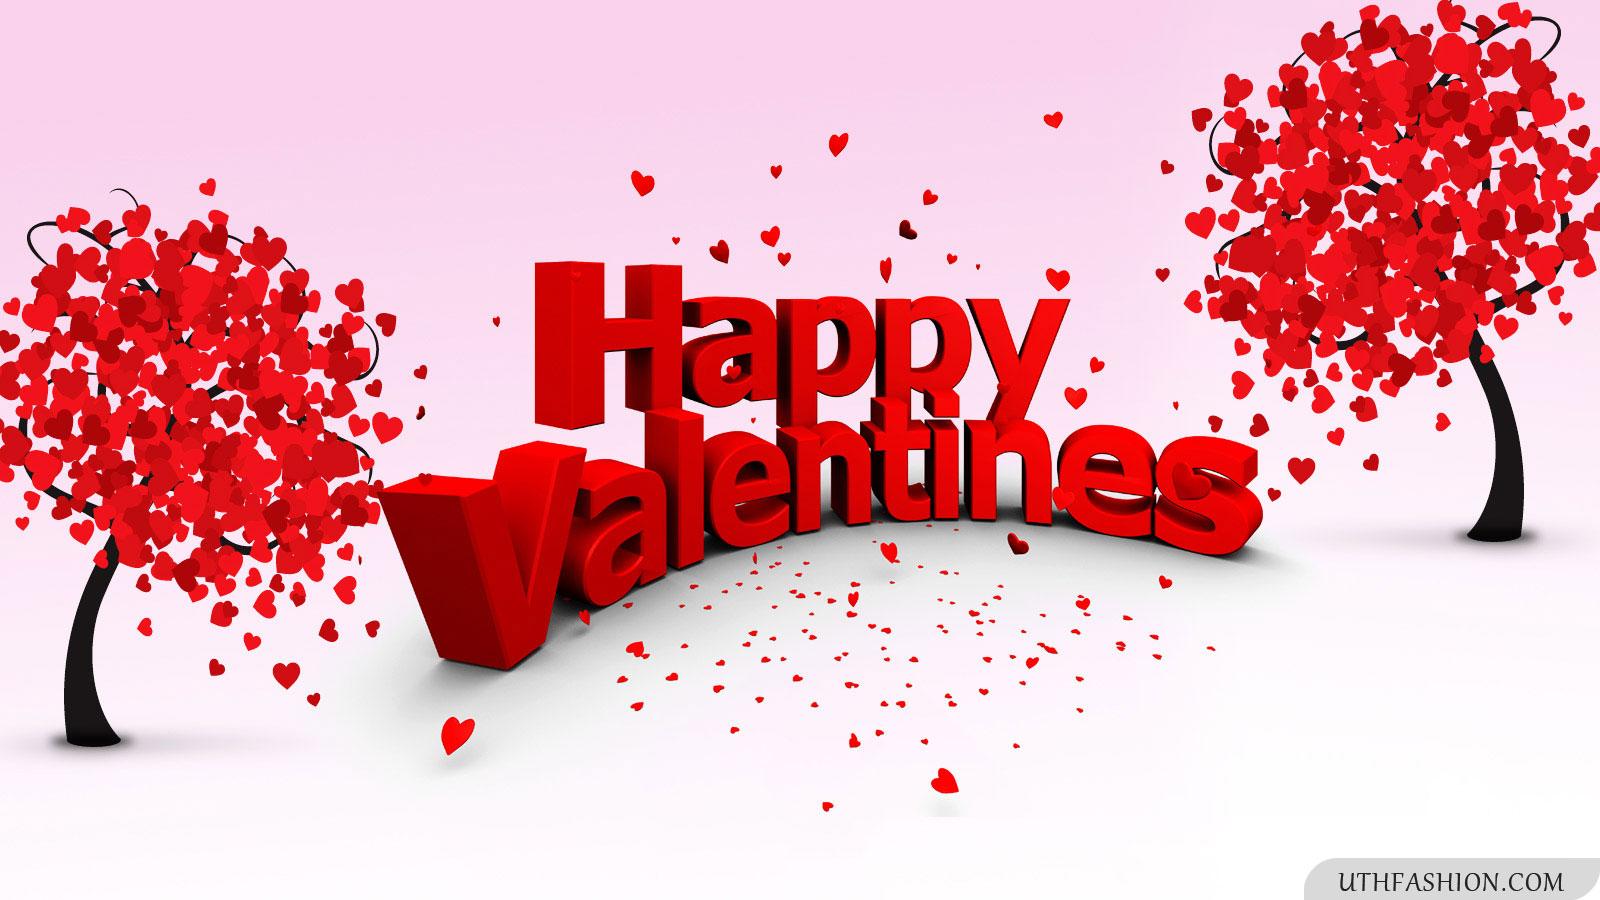 Free download Happy Valentines Day Image And Love.